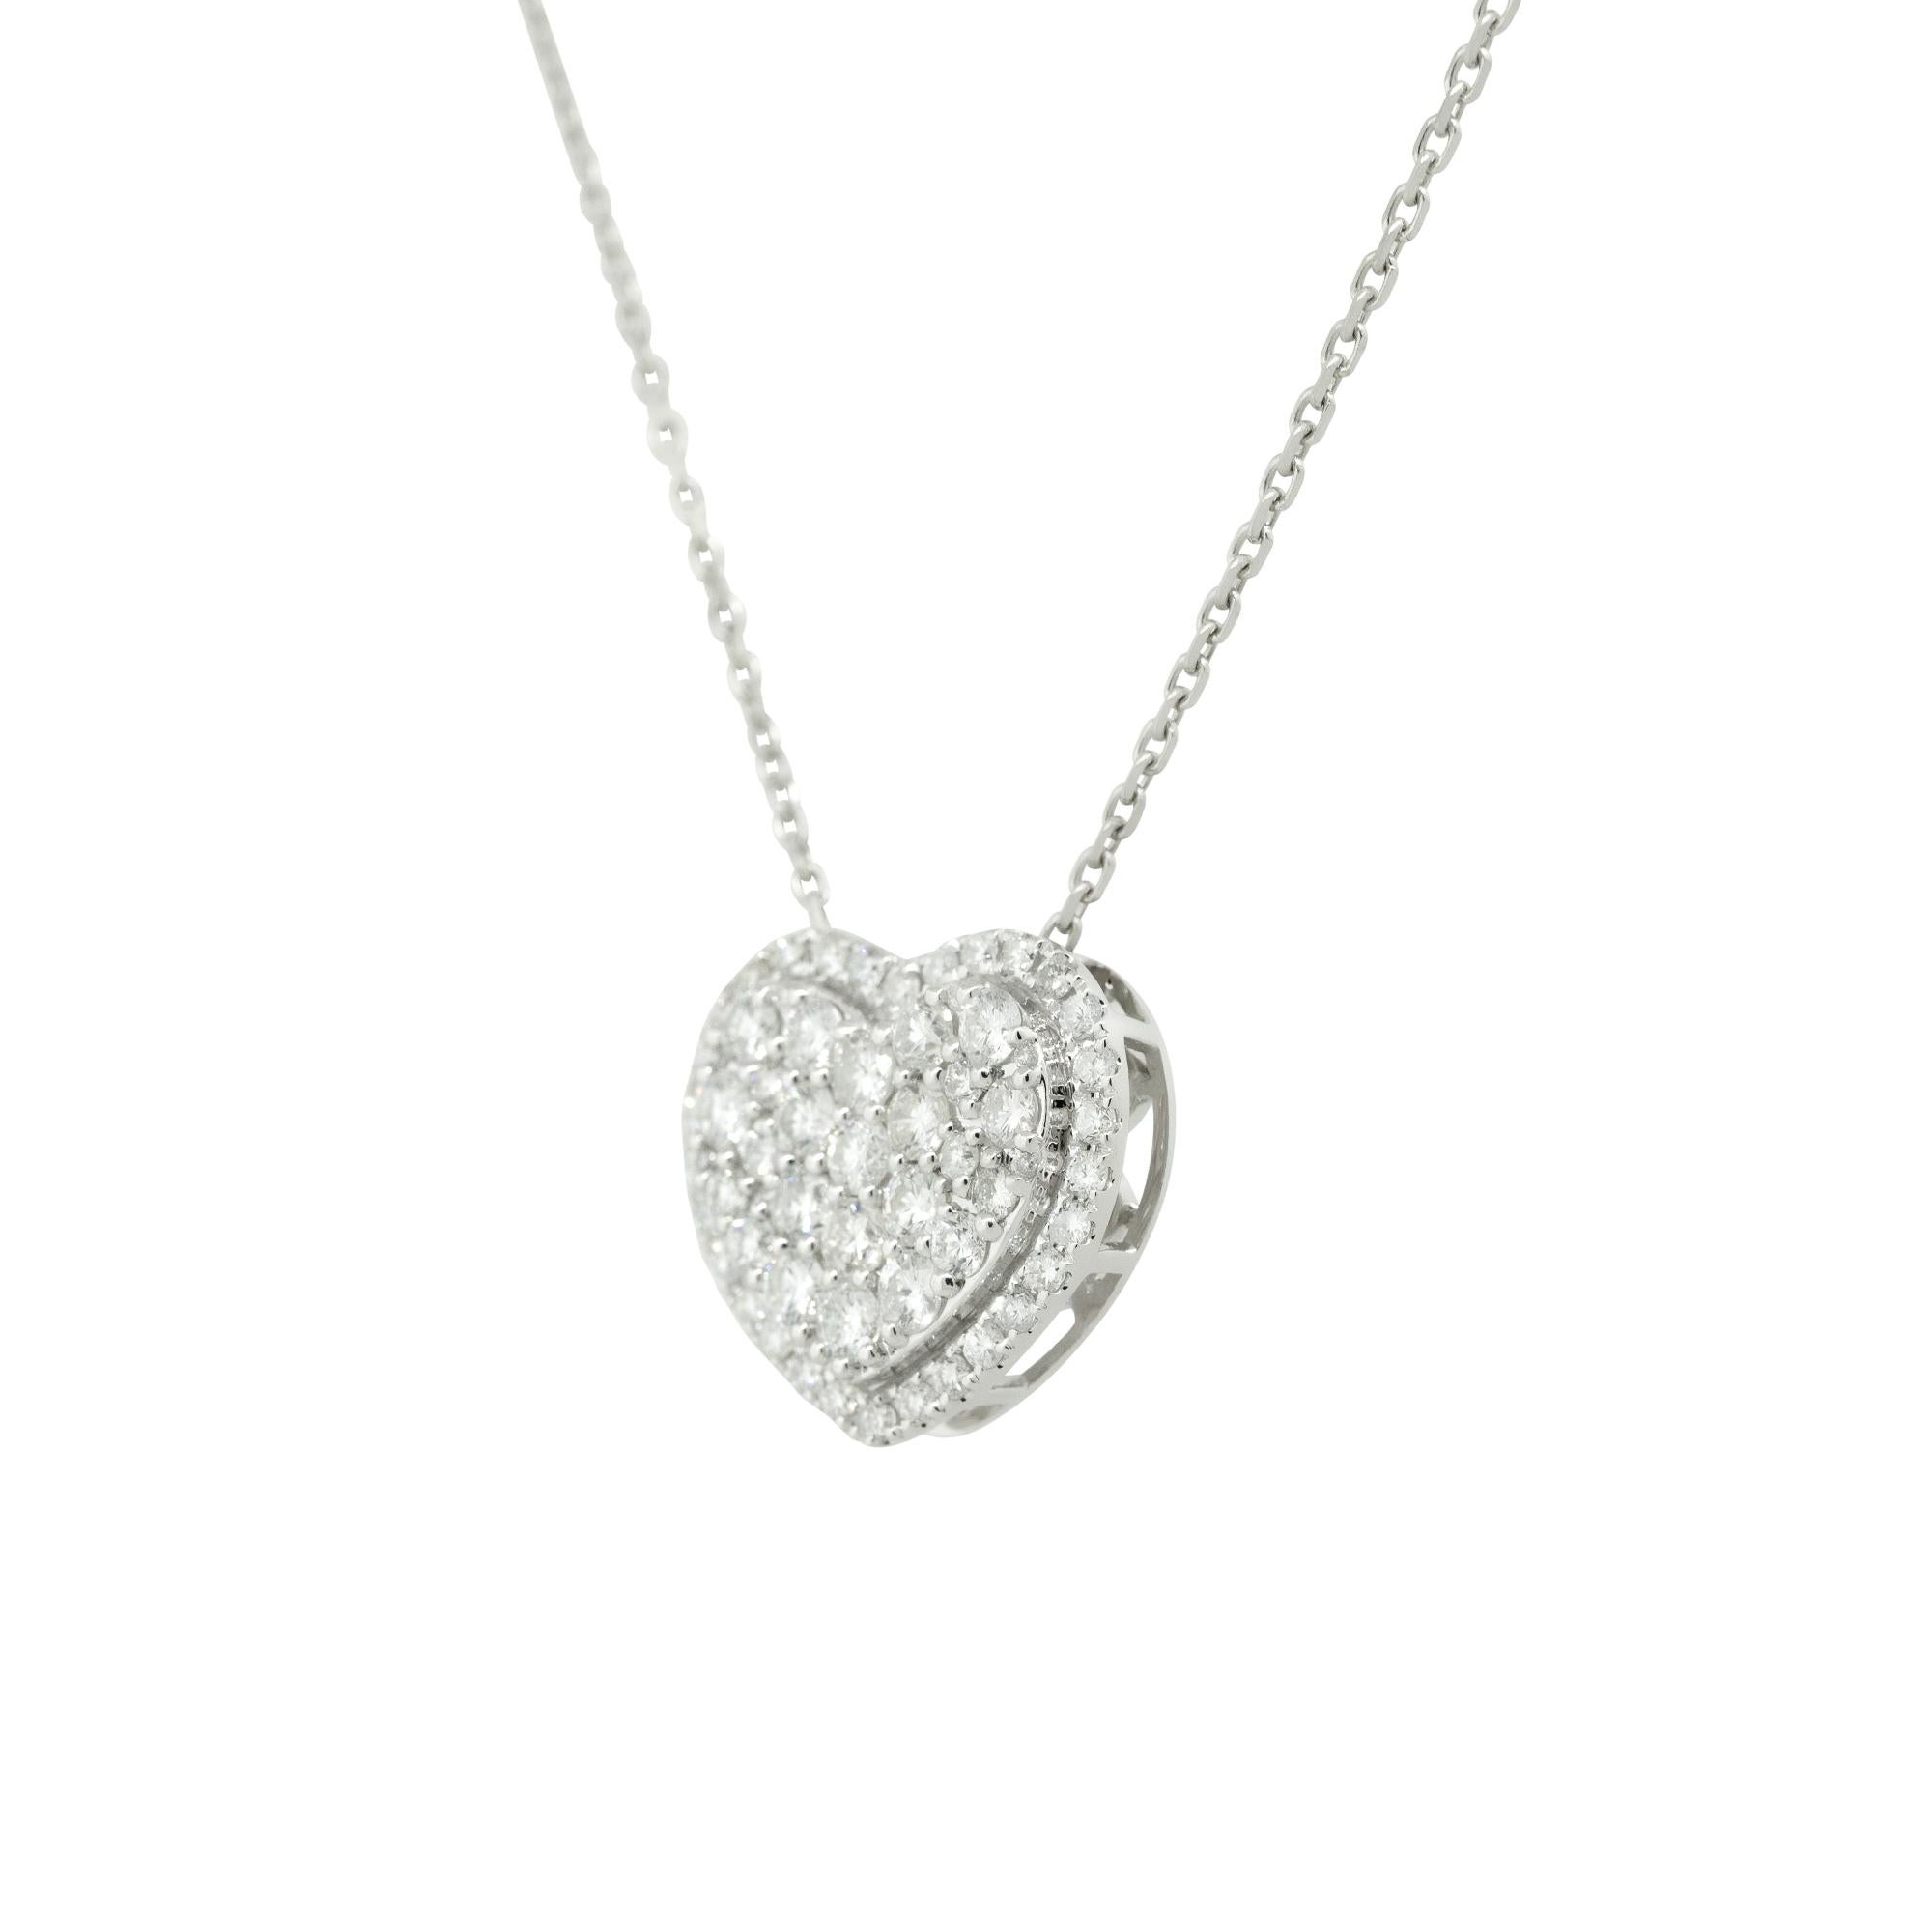 1.0 Carat Pave Diamond Heart Necklace 18 Karat in Stock In Excellent Condition For Sale In Boca Raton, FL